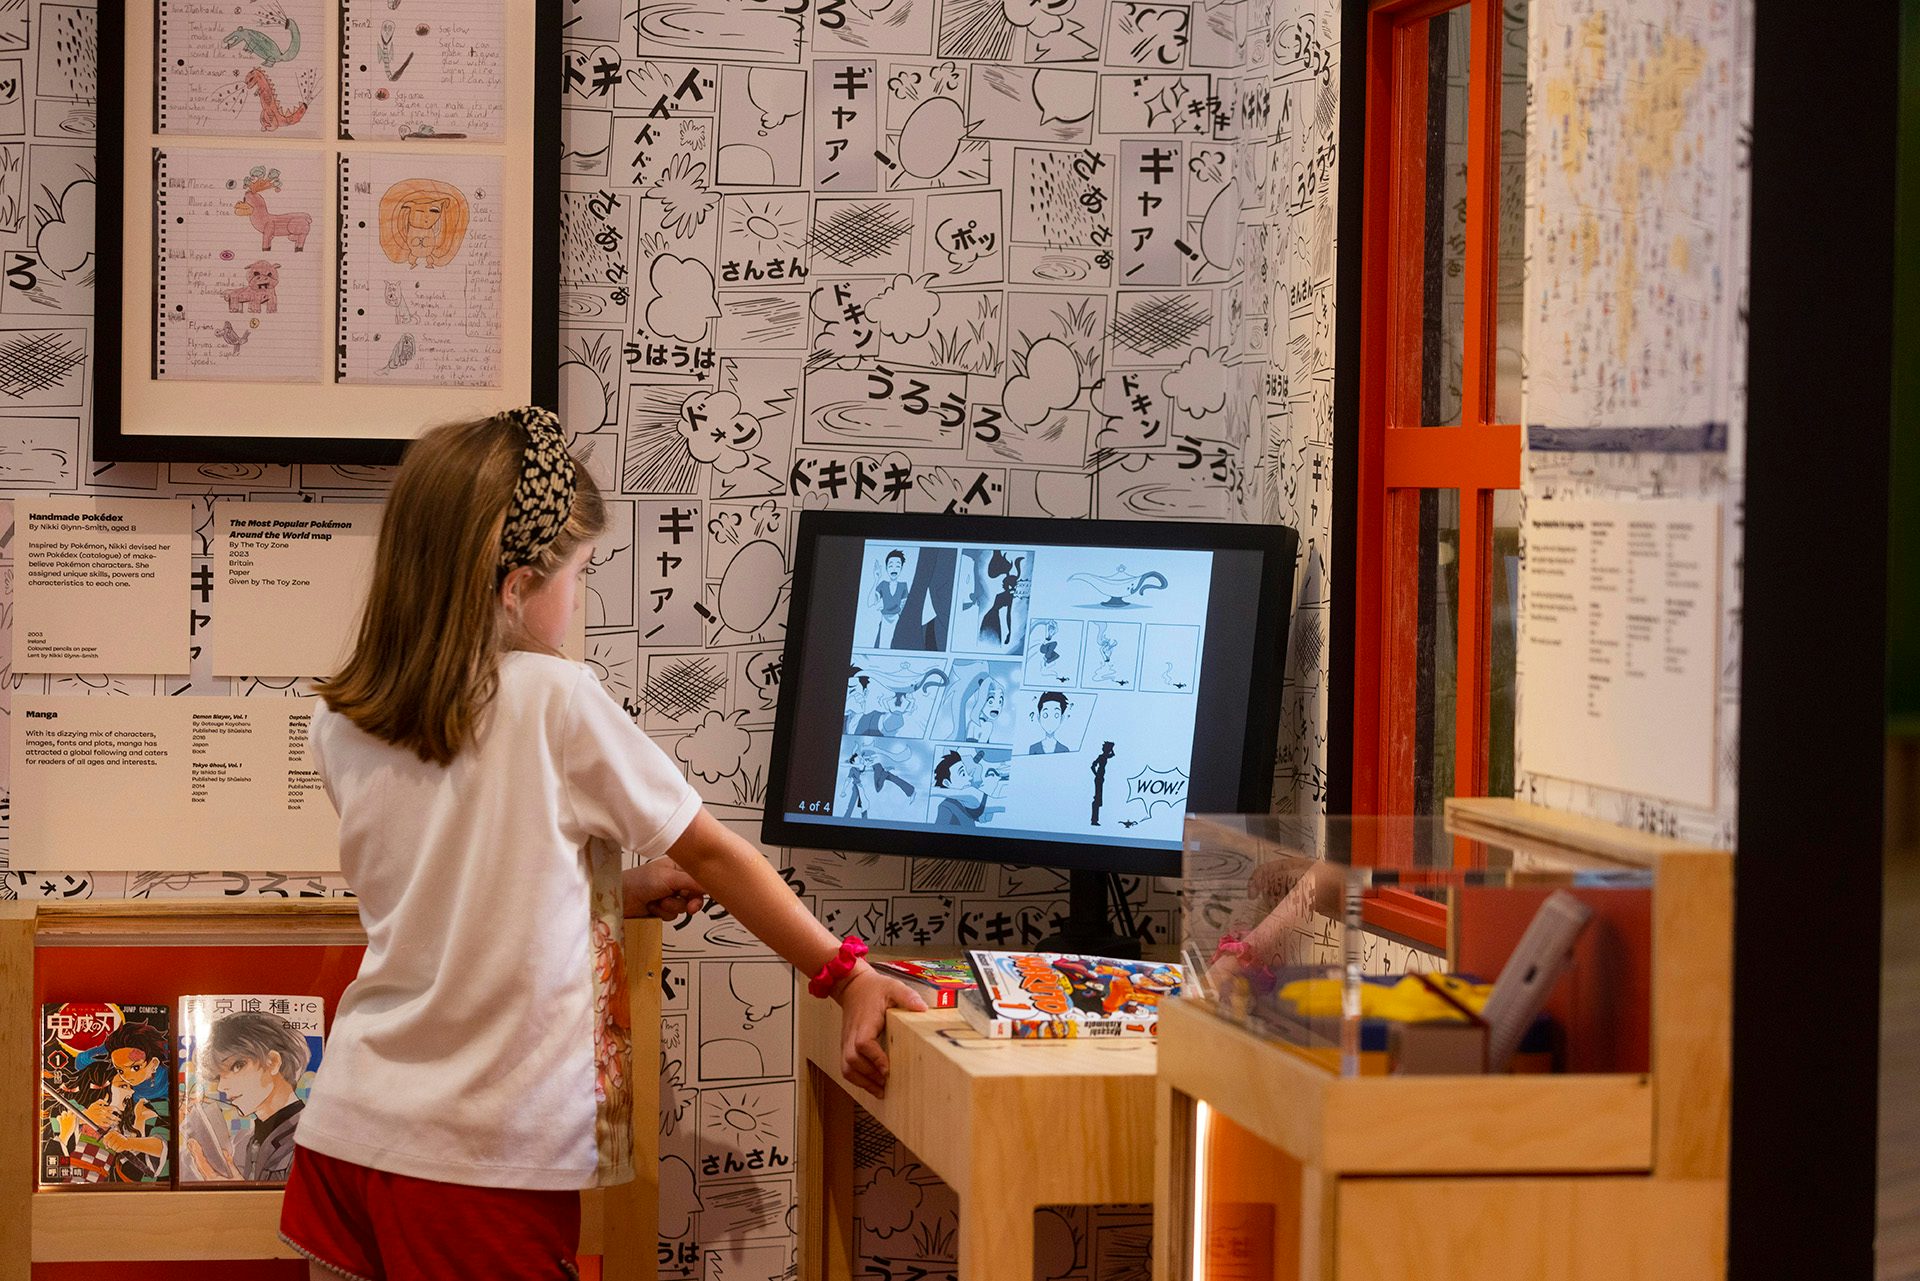 Photo of a child looking at a screen displaying manga inside a room decorated with black and white manga illustrations at the exhibition Japan: From Myths to Manga at the Young V&A